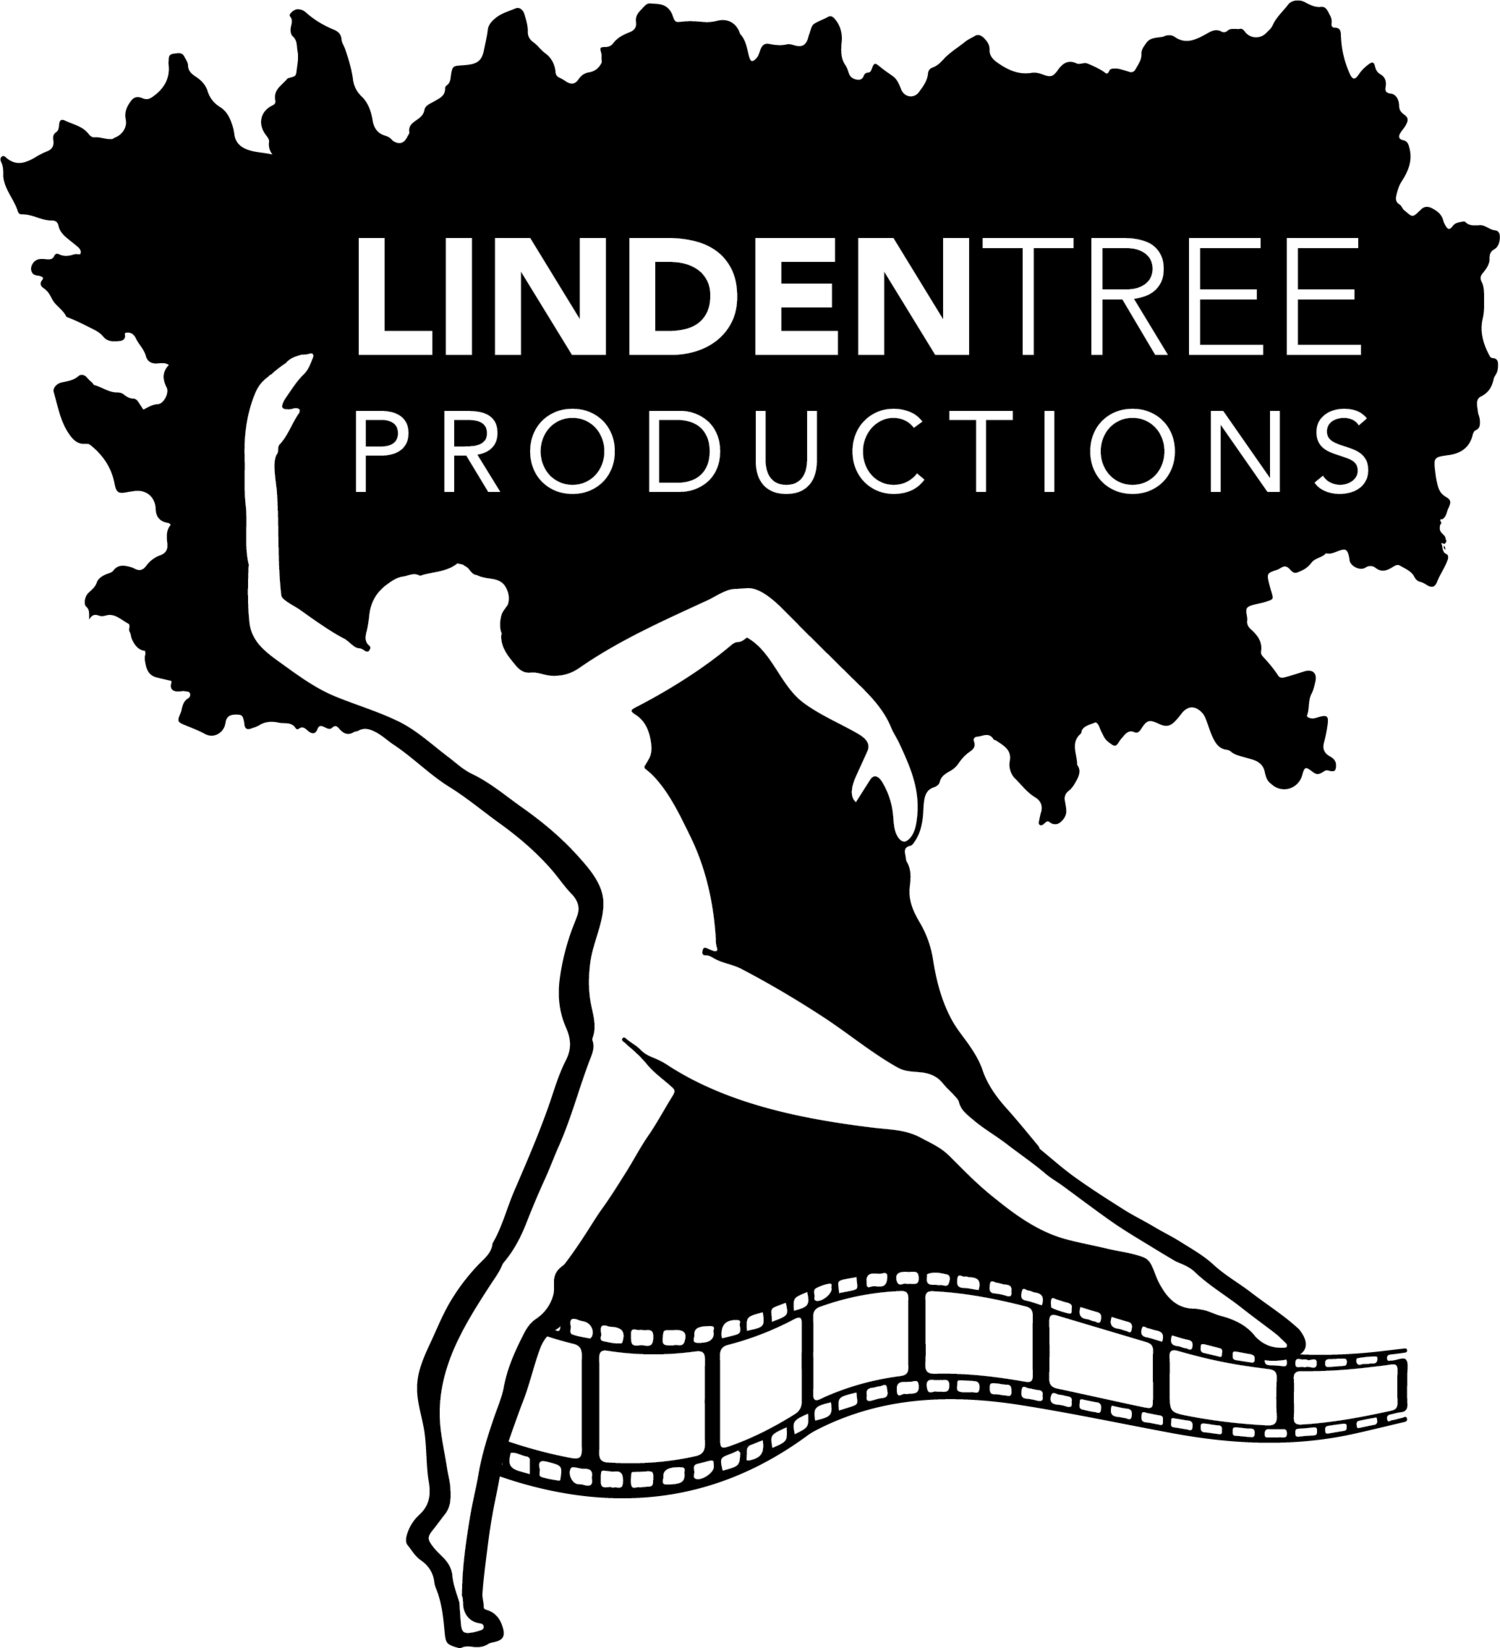 Linden Tree Productions